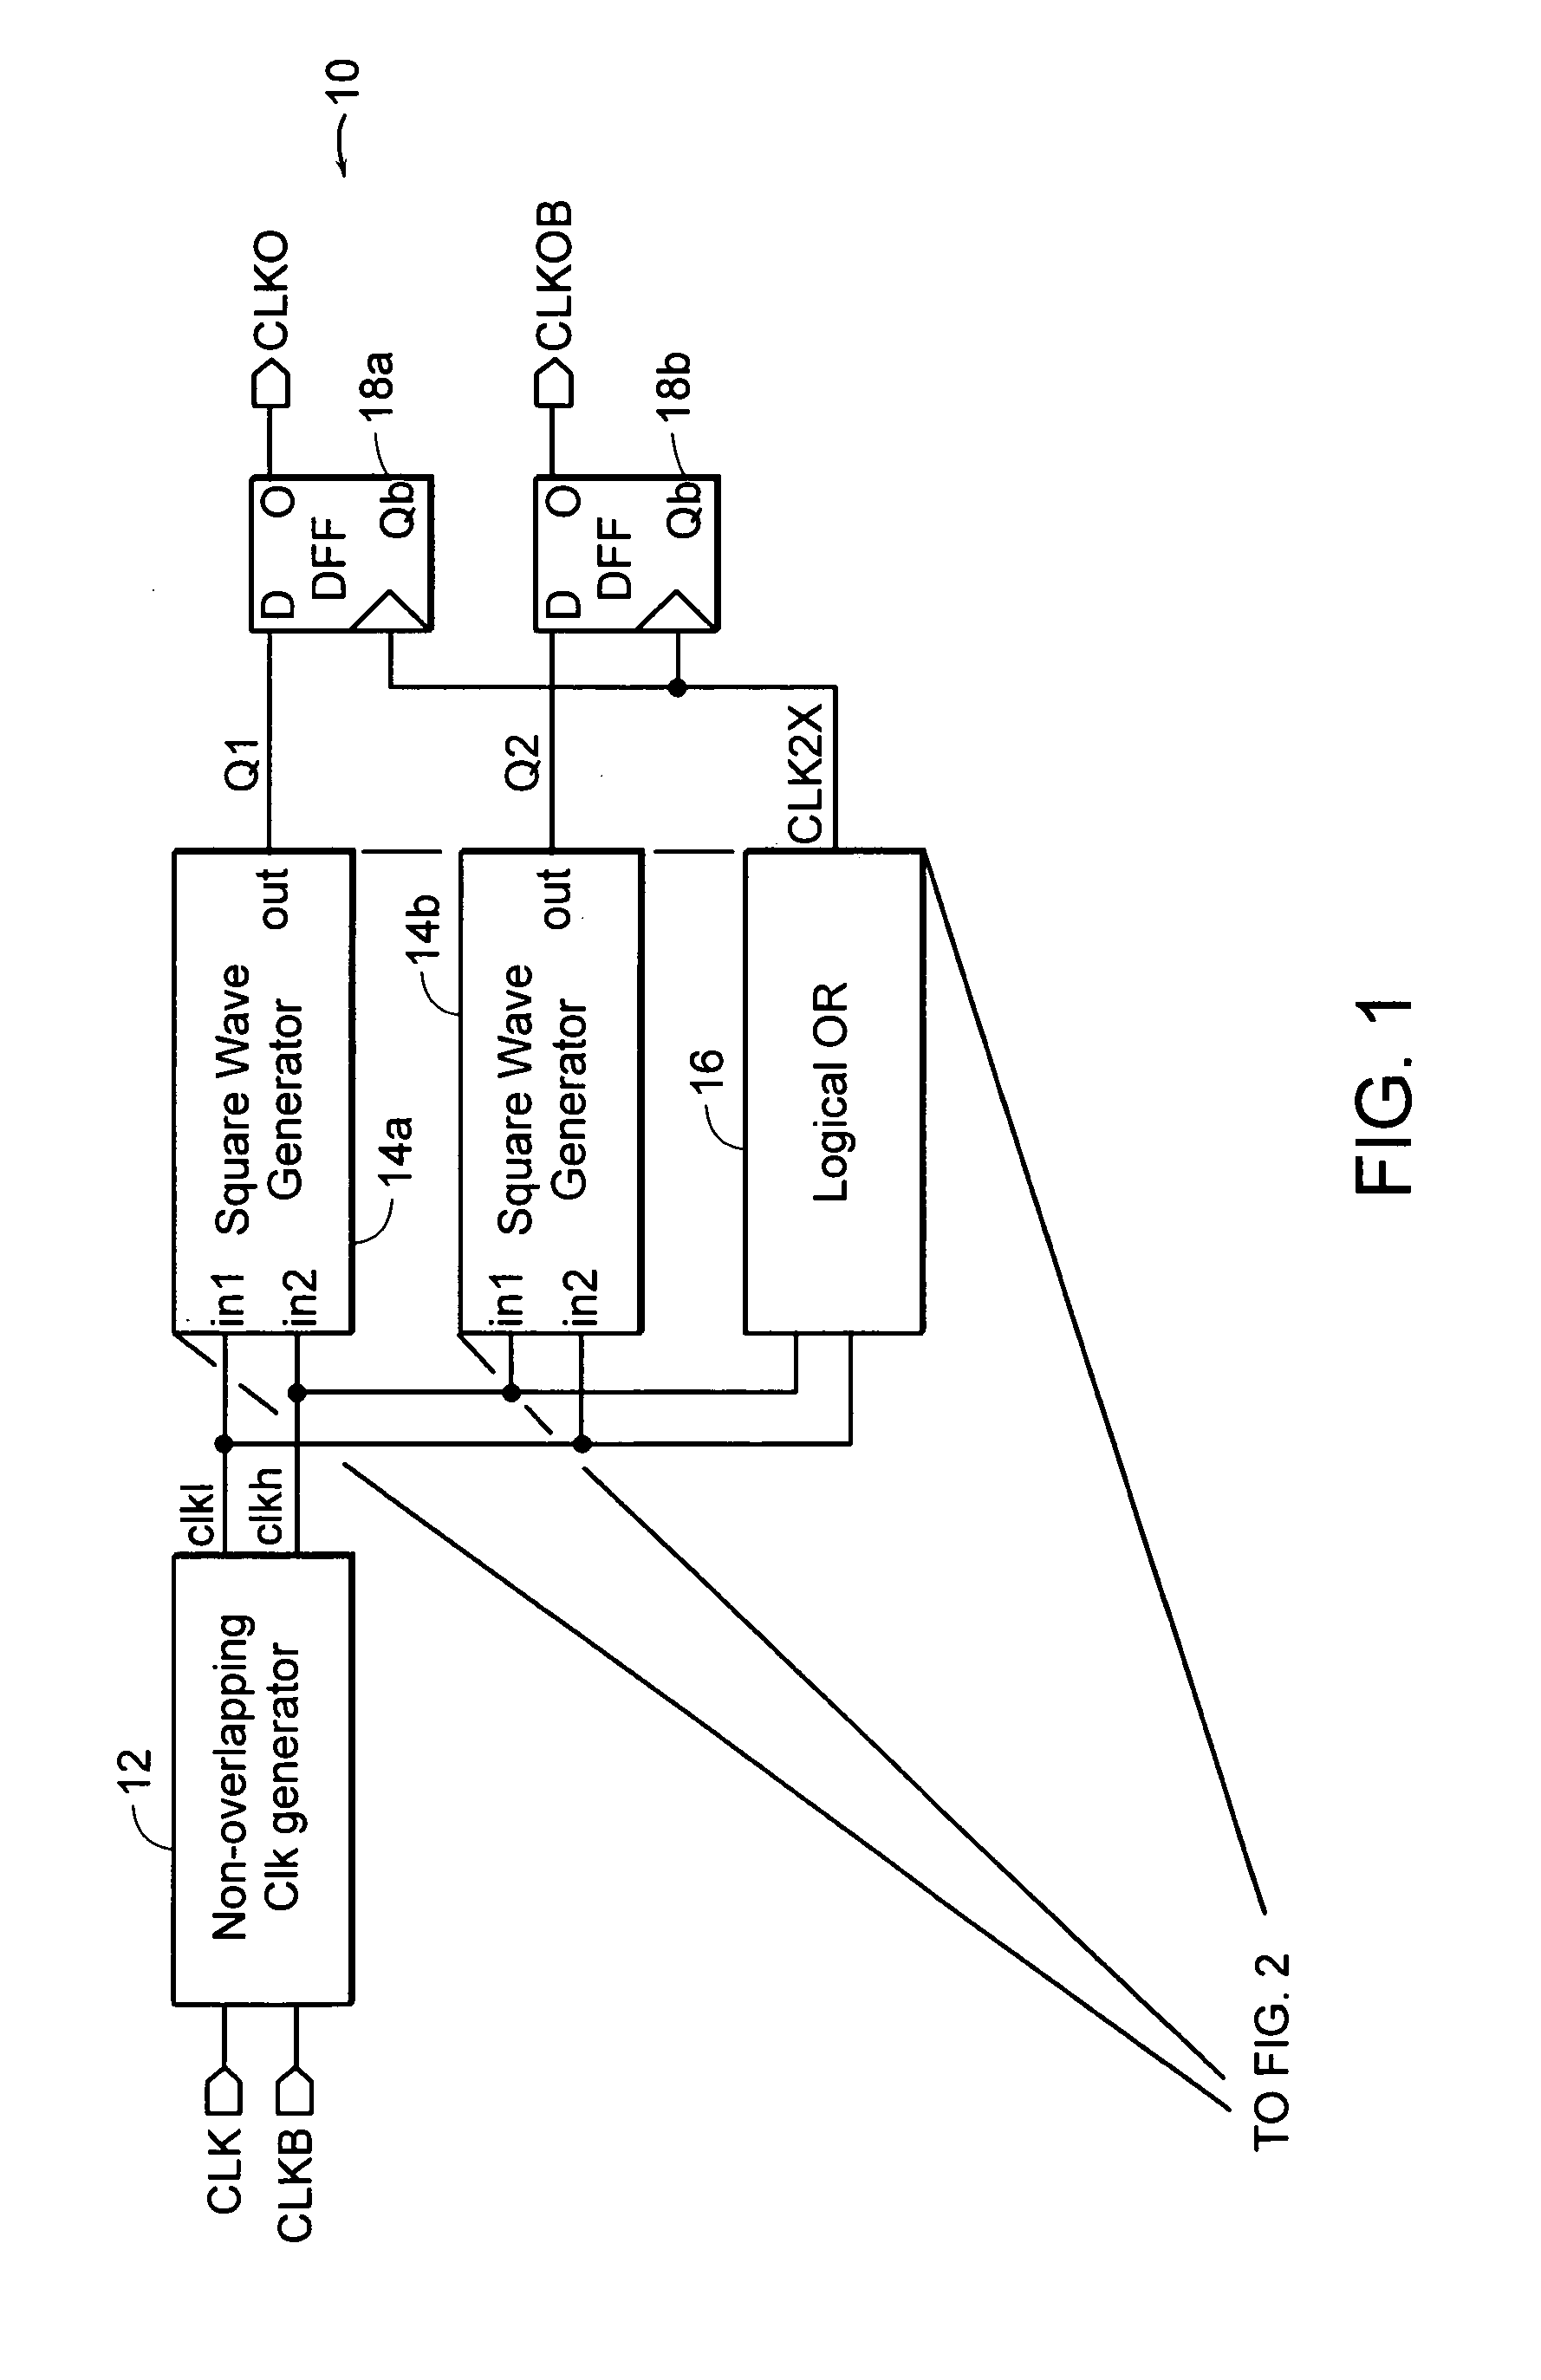 System and method for reducing skew in complementary signals that can be used to synchronously clock a double data rate output